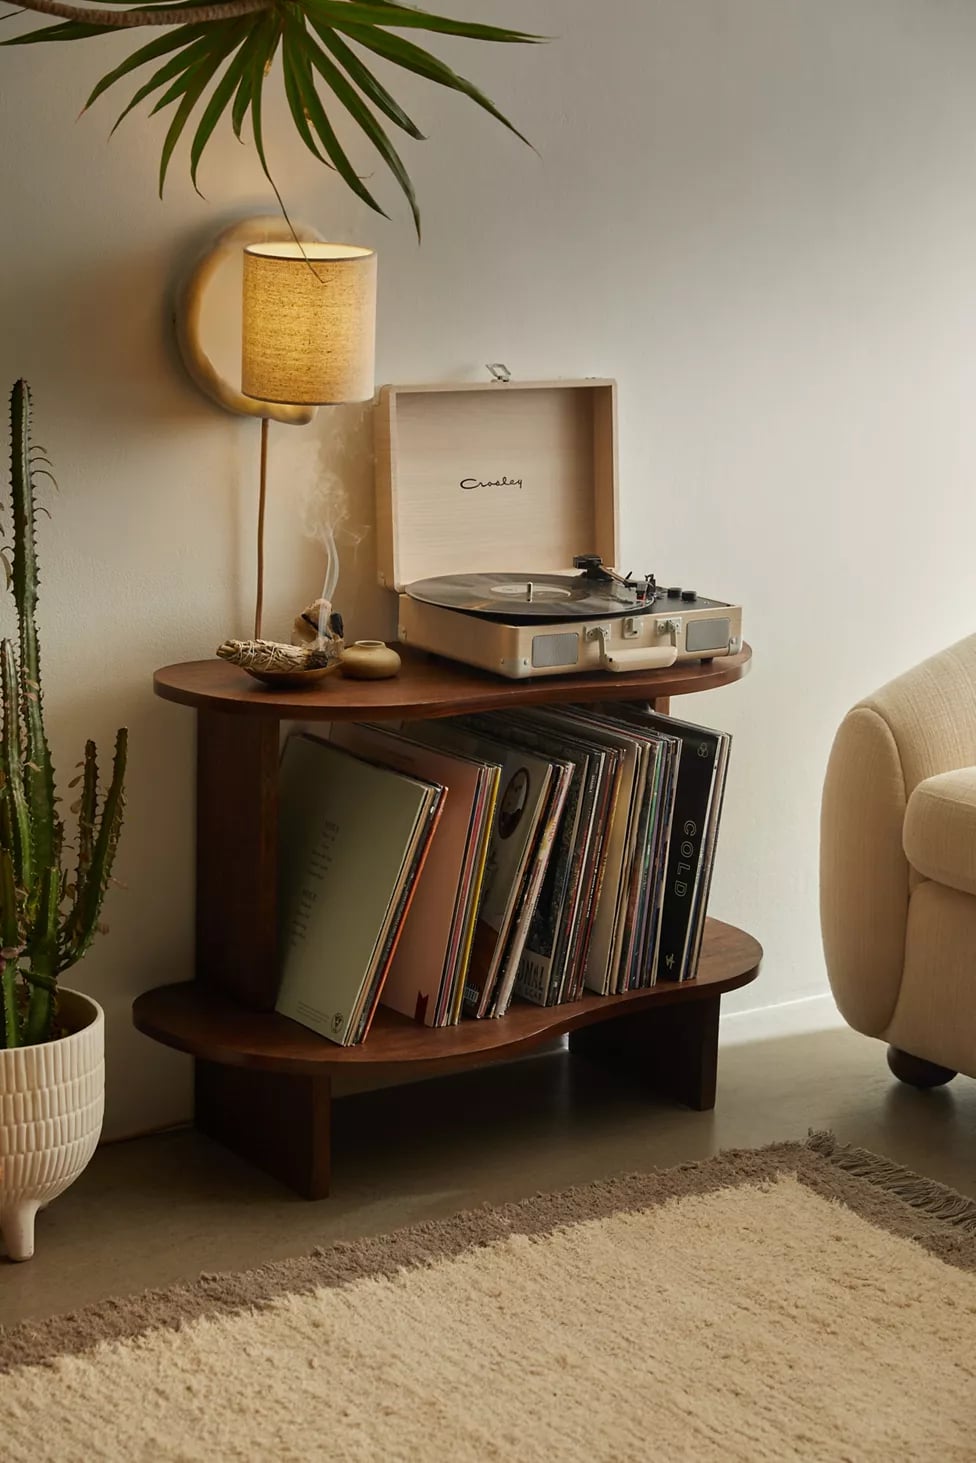 Huron Vinyl Storage Rack Bursting With Impeccable Style, These Record-Player Stands Are a Blast From the Past | Home Photo